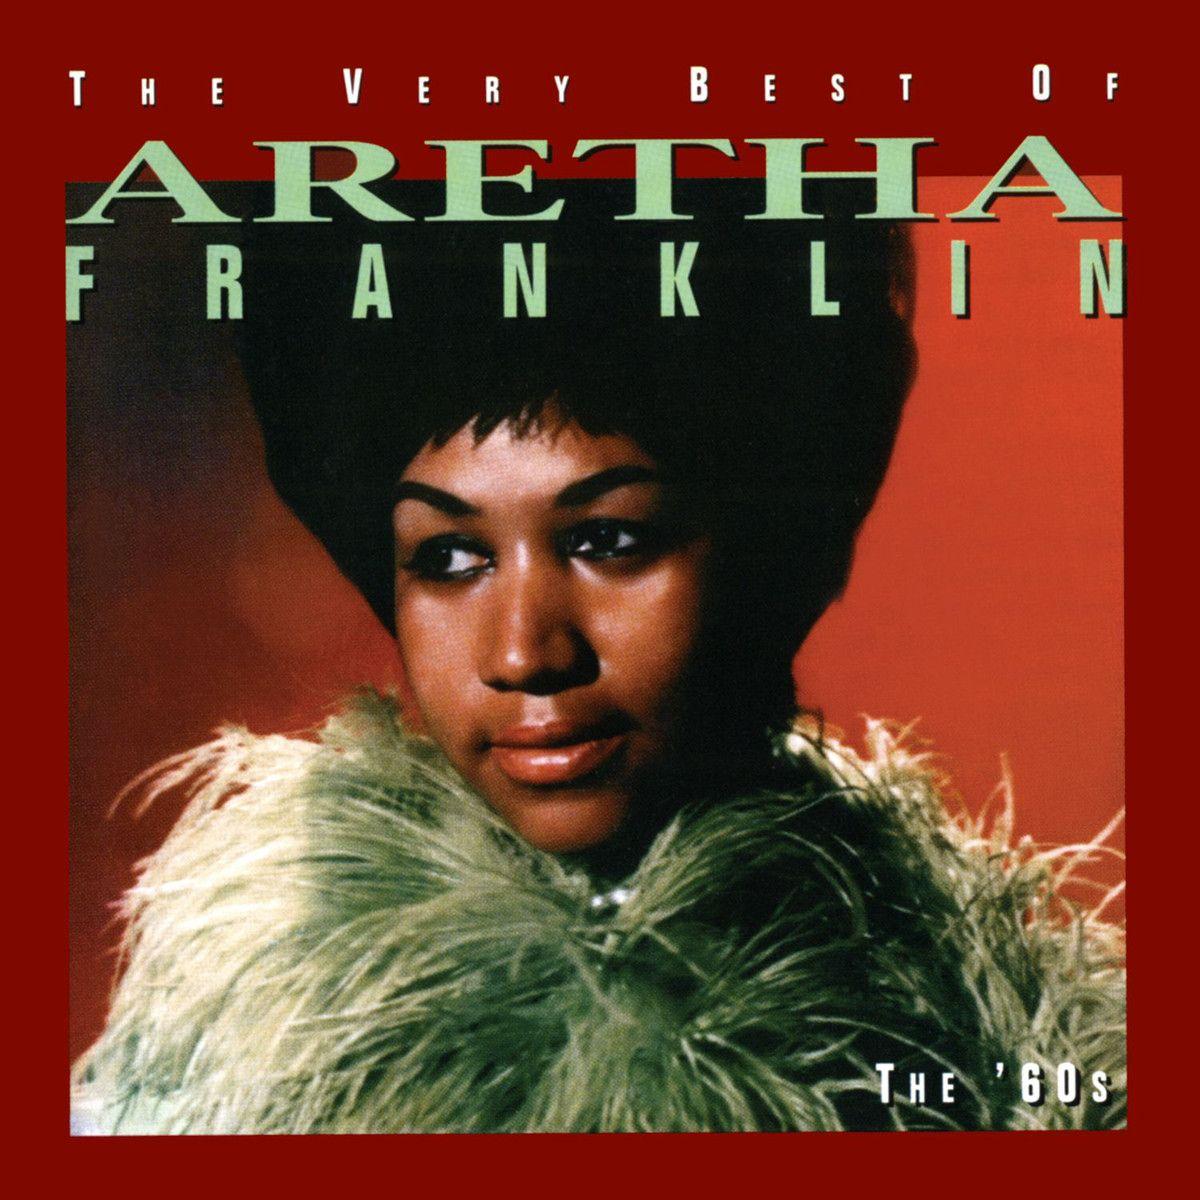 The Very Best of Aretha Franklin: The 60's is an incredible album